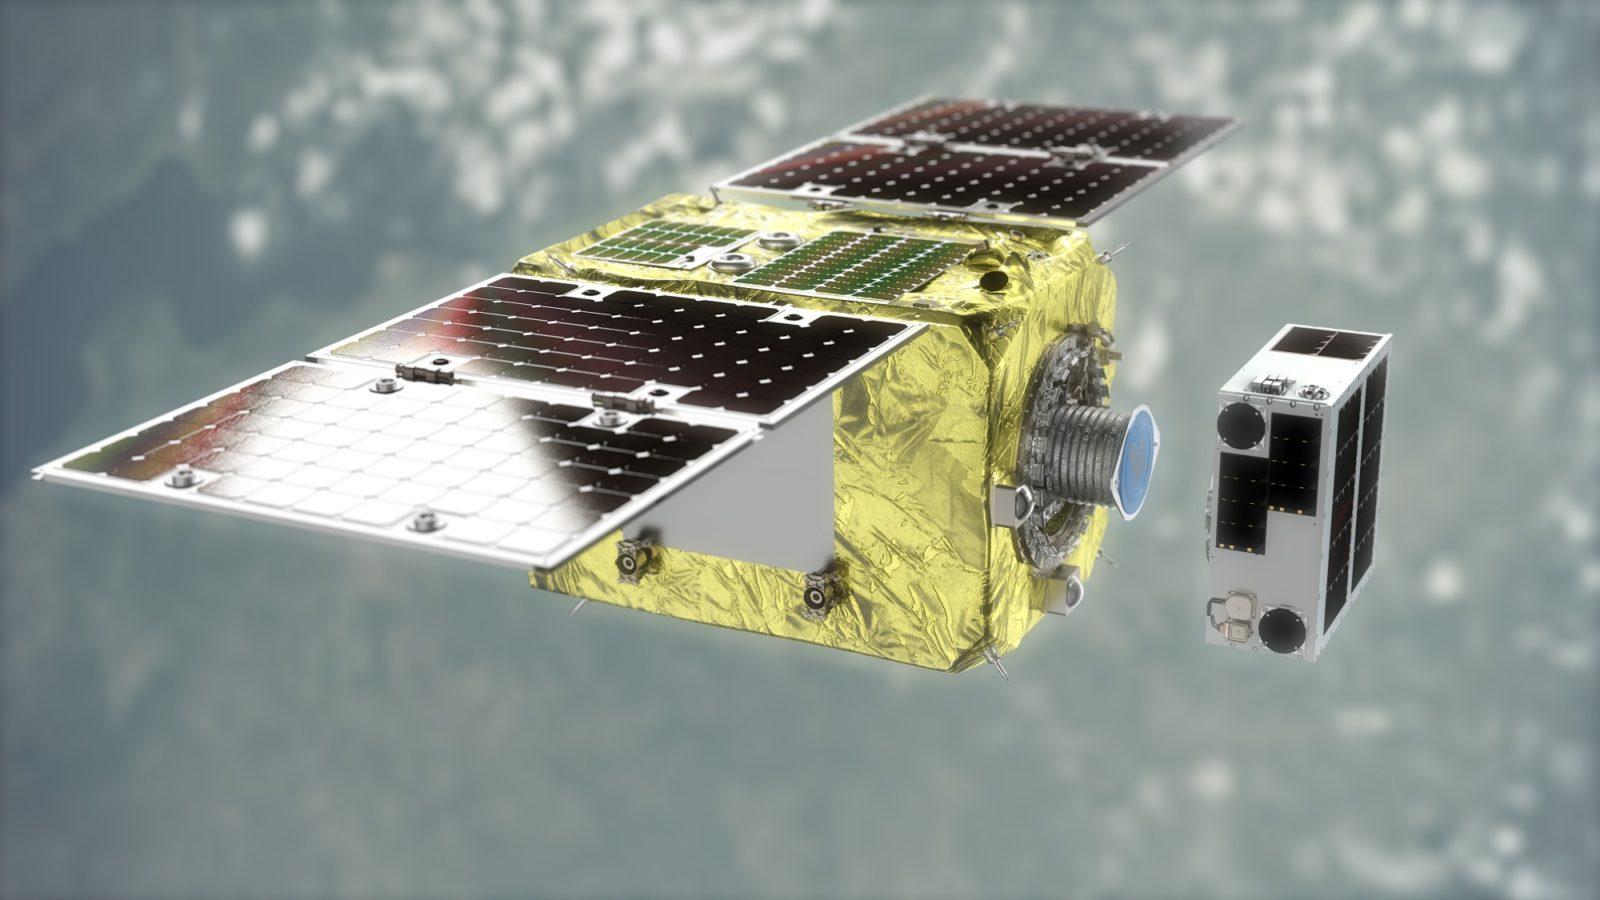 Astroscale U.S. Inc. Awarded $25.5m In-space Refueling Contract